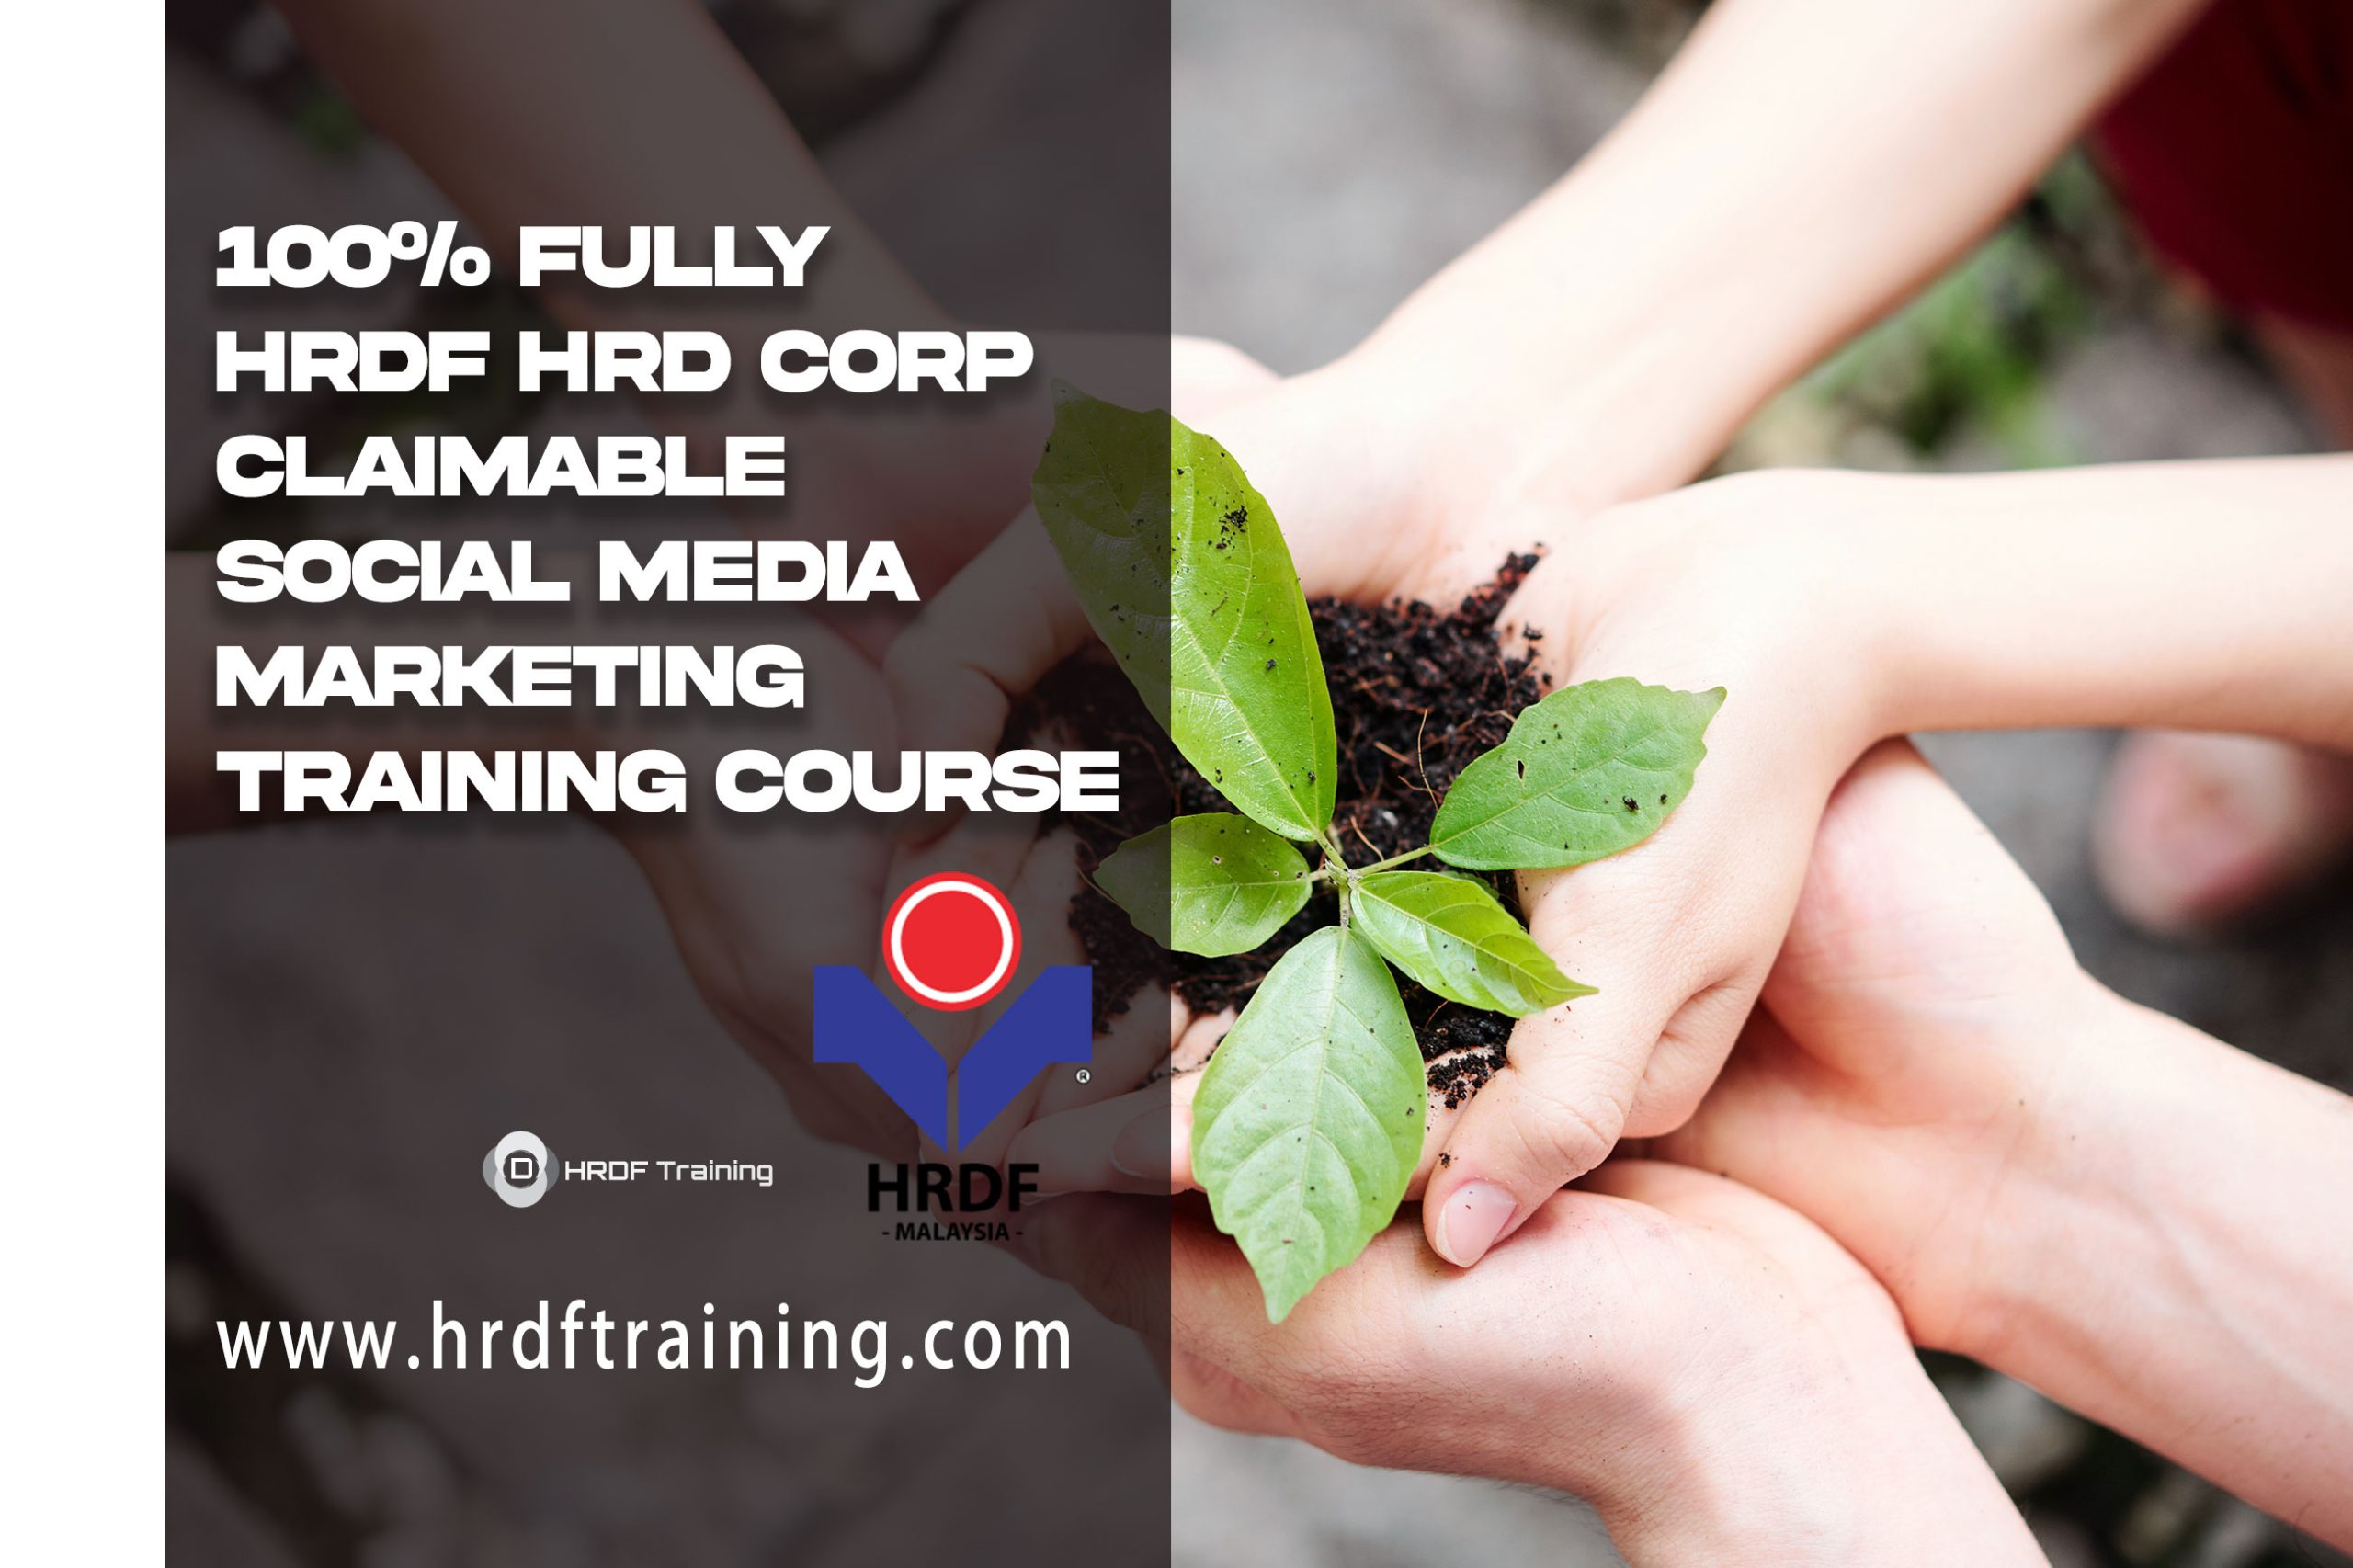 HRDF HRD Corp Claimable Social Media Marketing Training Course - February 2022